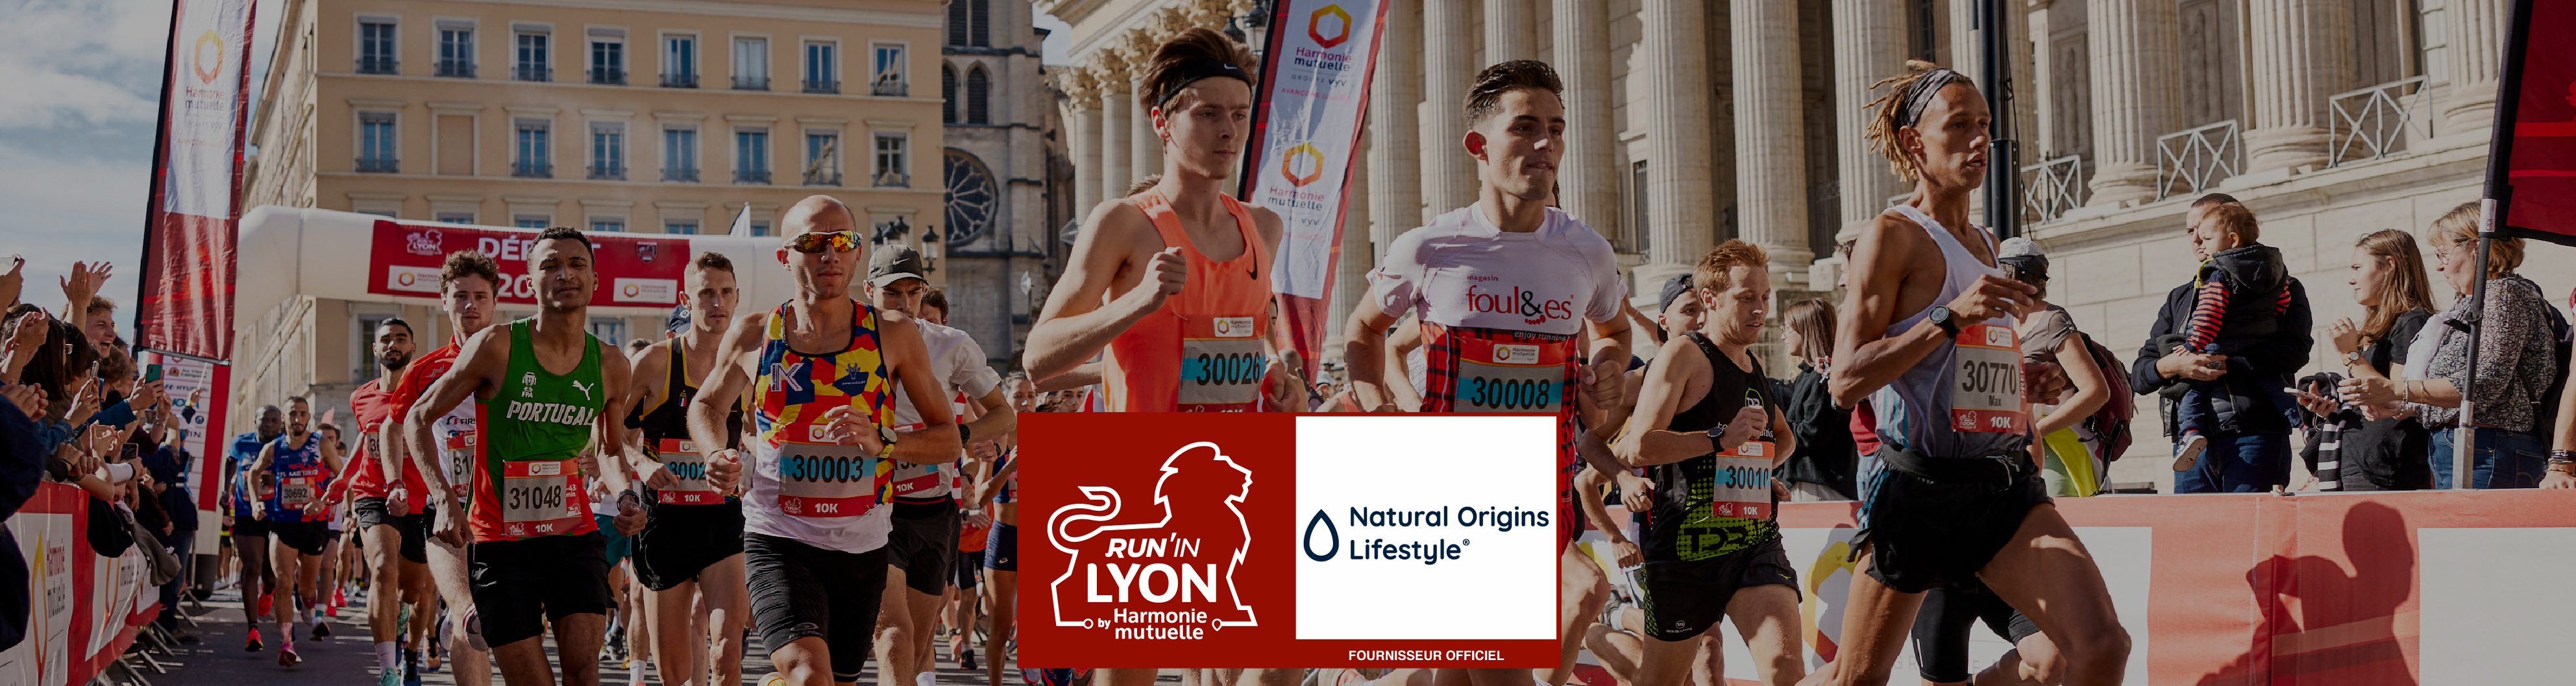 Natural Origins official supplier for the Run In Lyon event with a Lifestyle product range devoted to sports nutrition